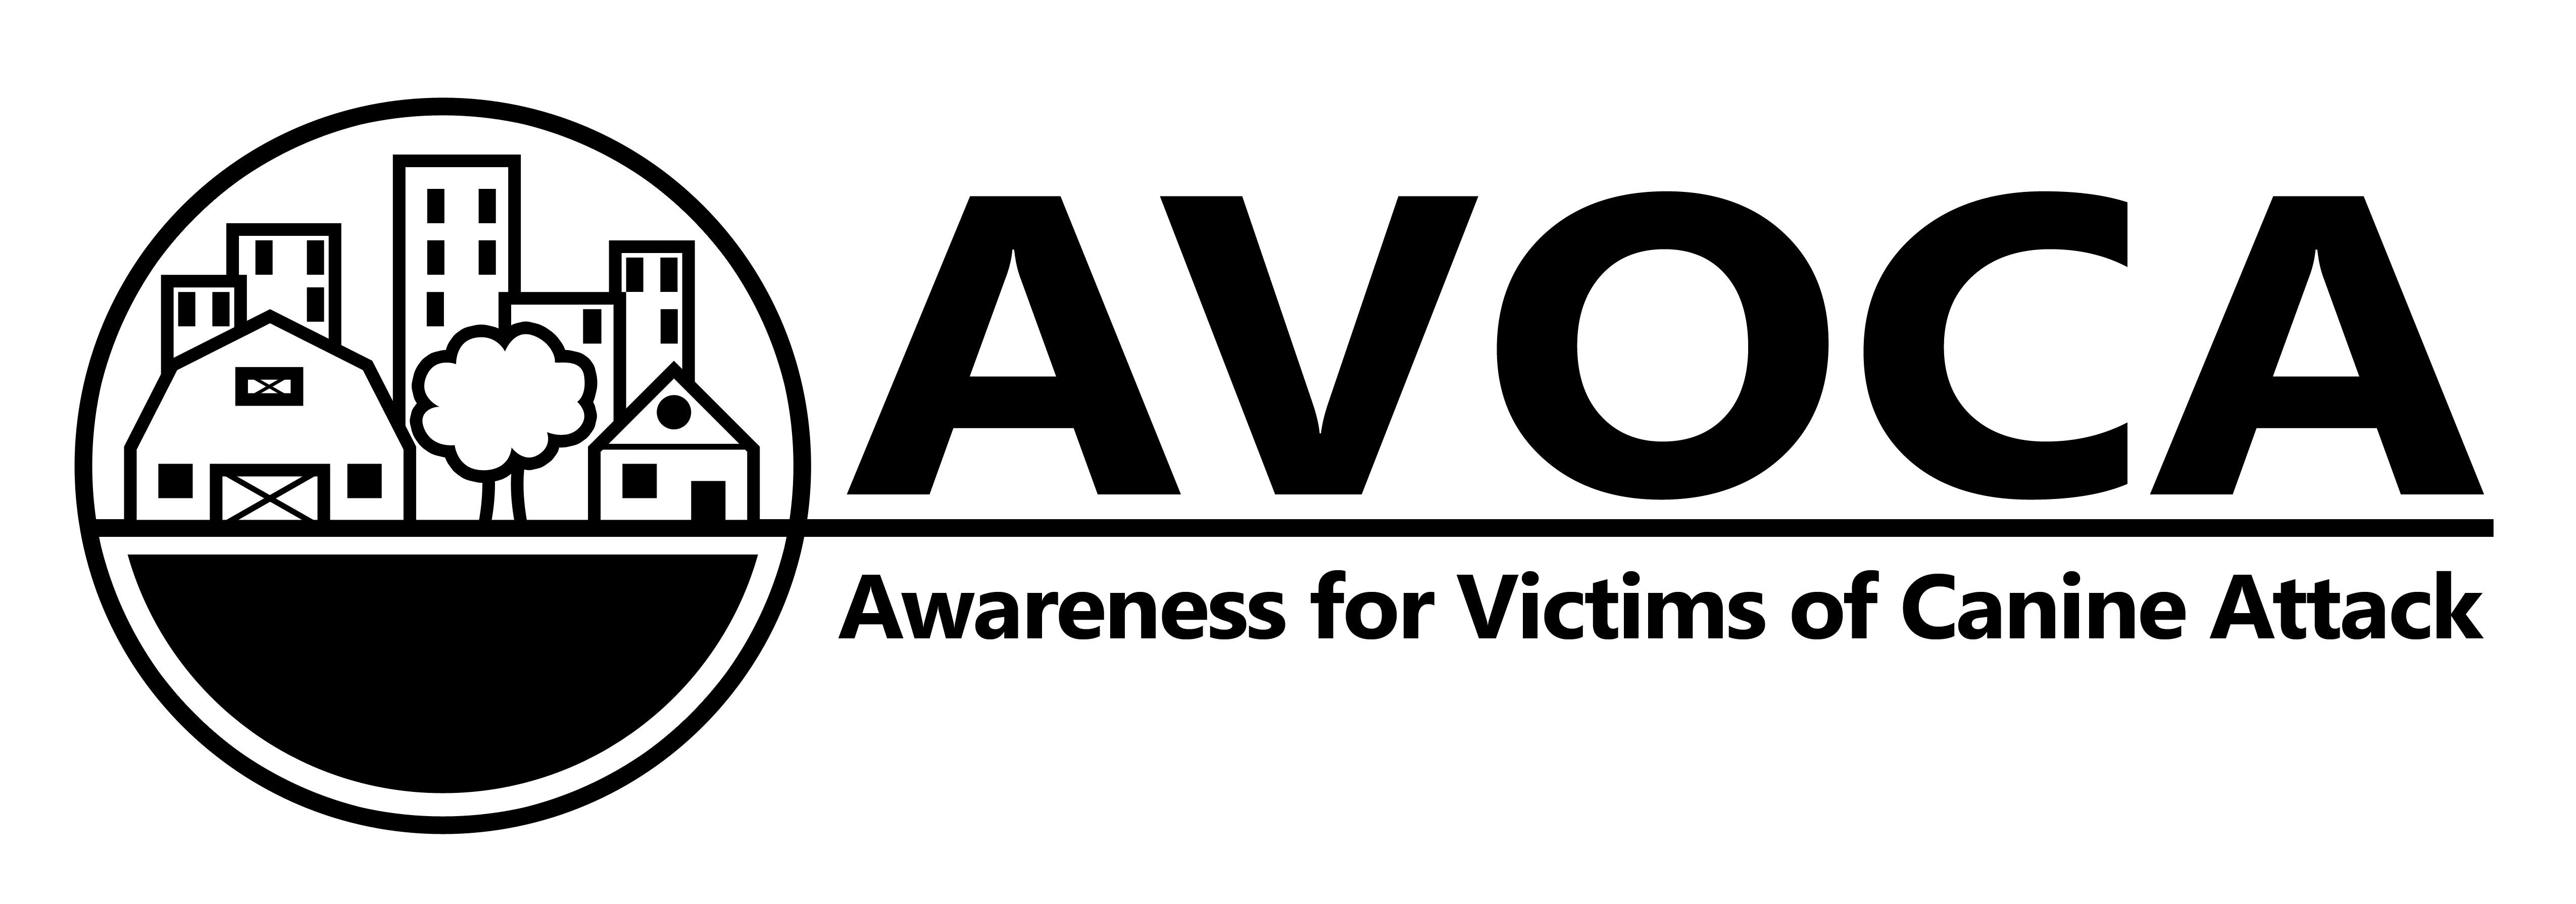 Awareness for Victims of Canine Attack (AVOCA) works to promote public safety with respect to dog ownership